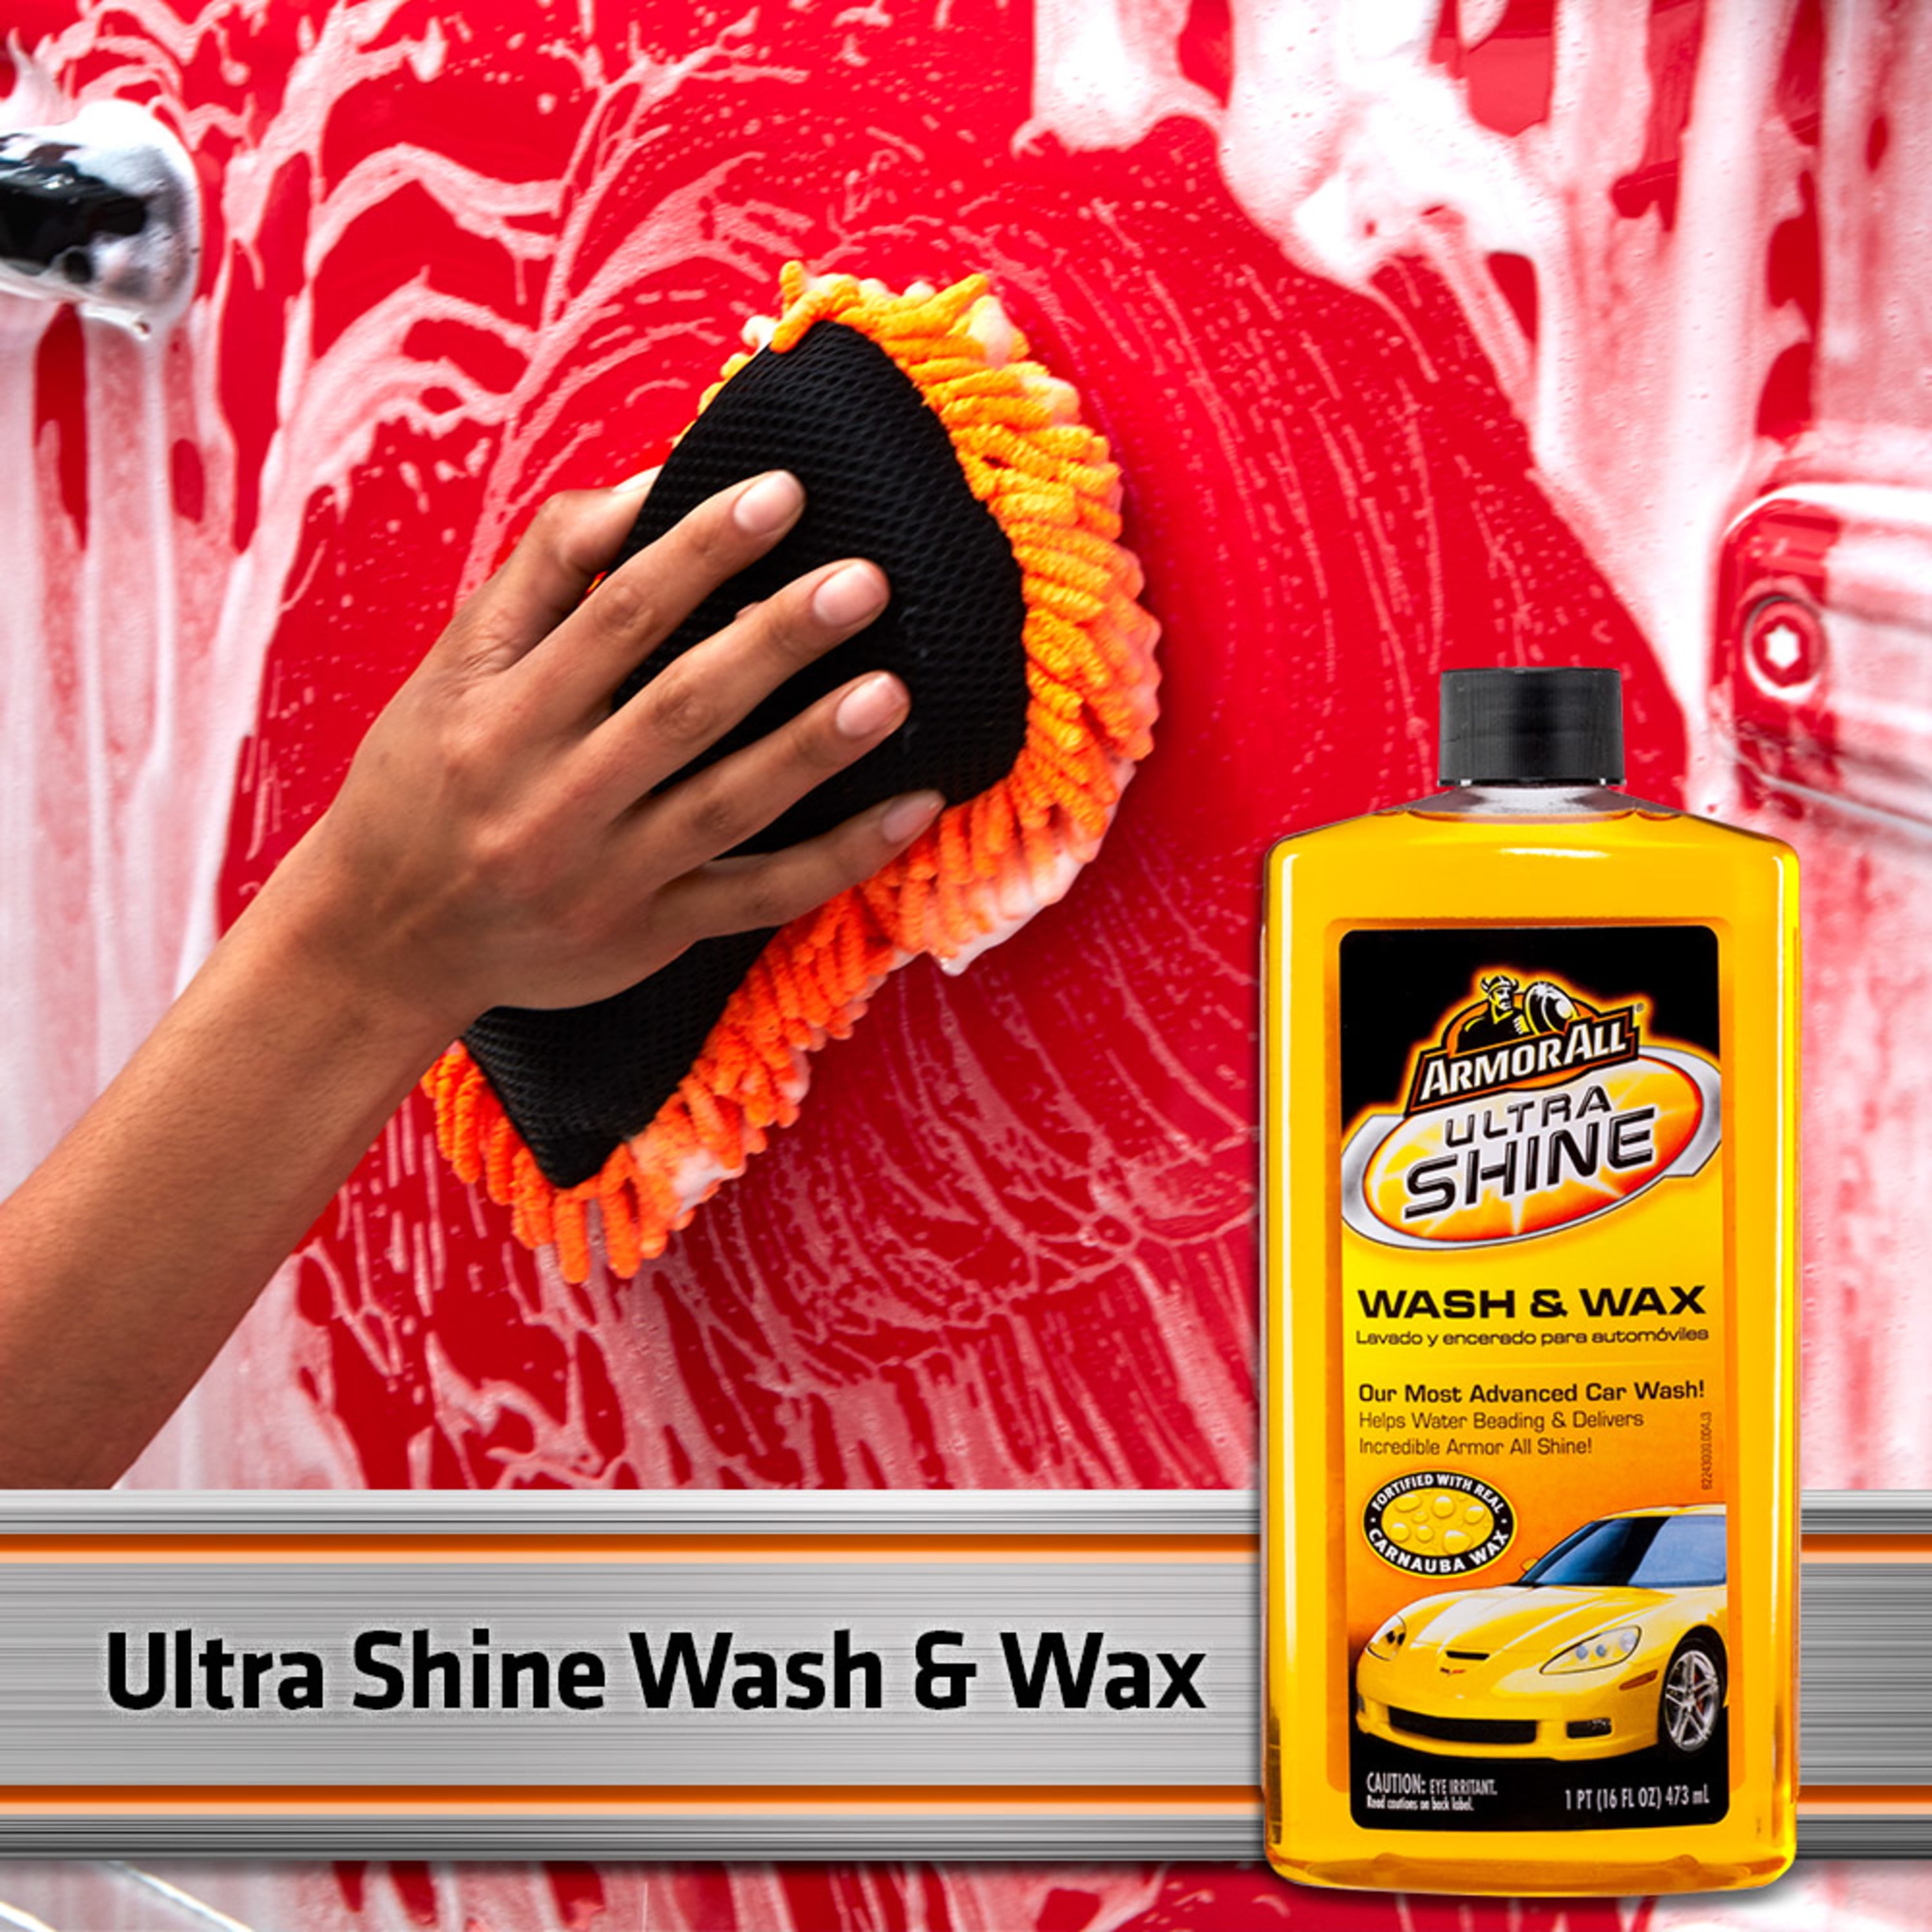 Armor All Ultra Shine Car Wash and Wax by Armor All, Car Wax and Cleaner  for Cars, Trucks and Motorcycles, 16 Fl Oz